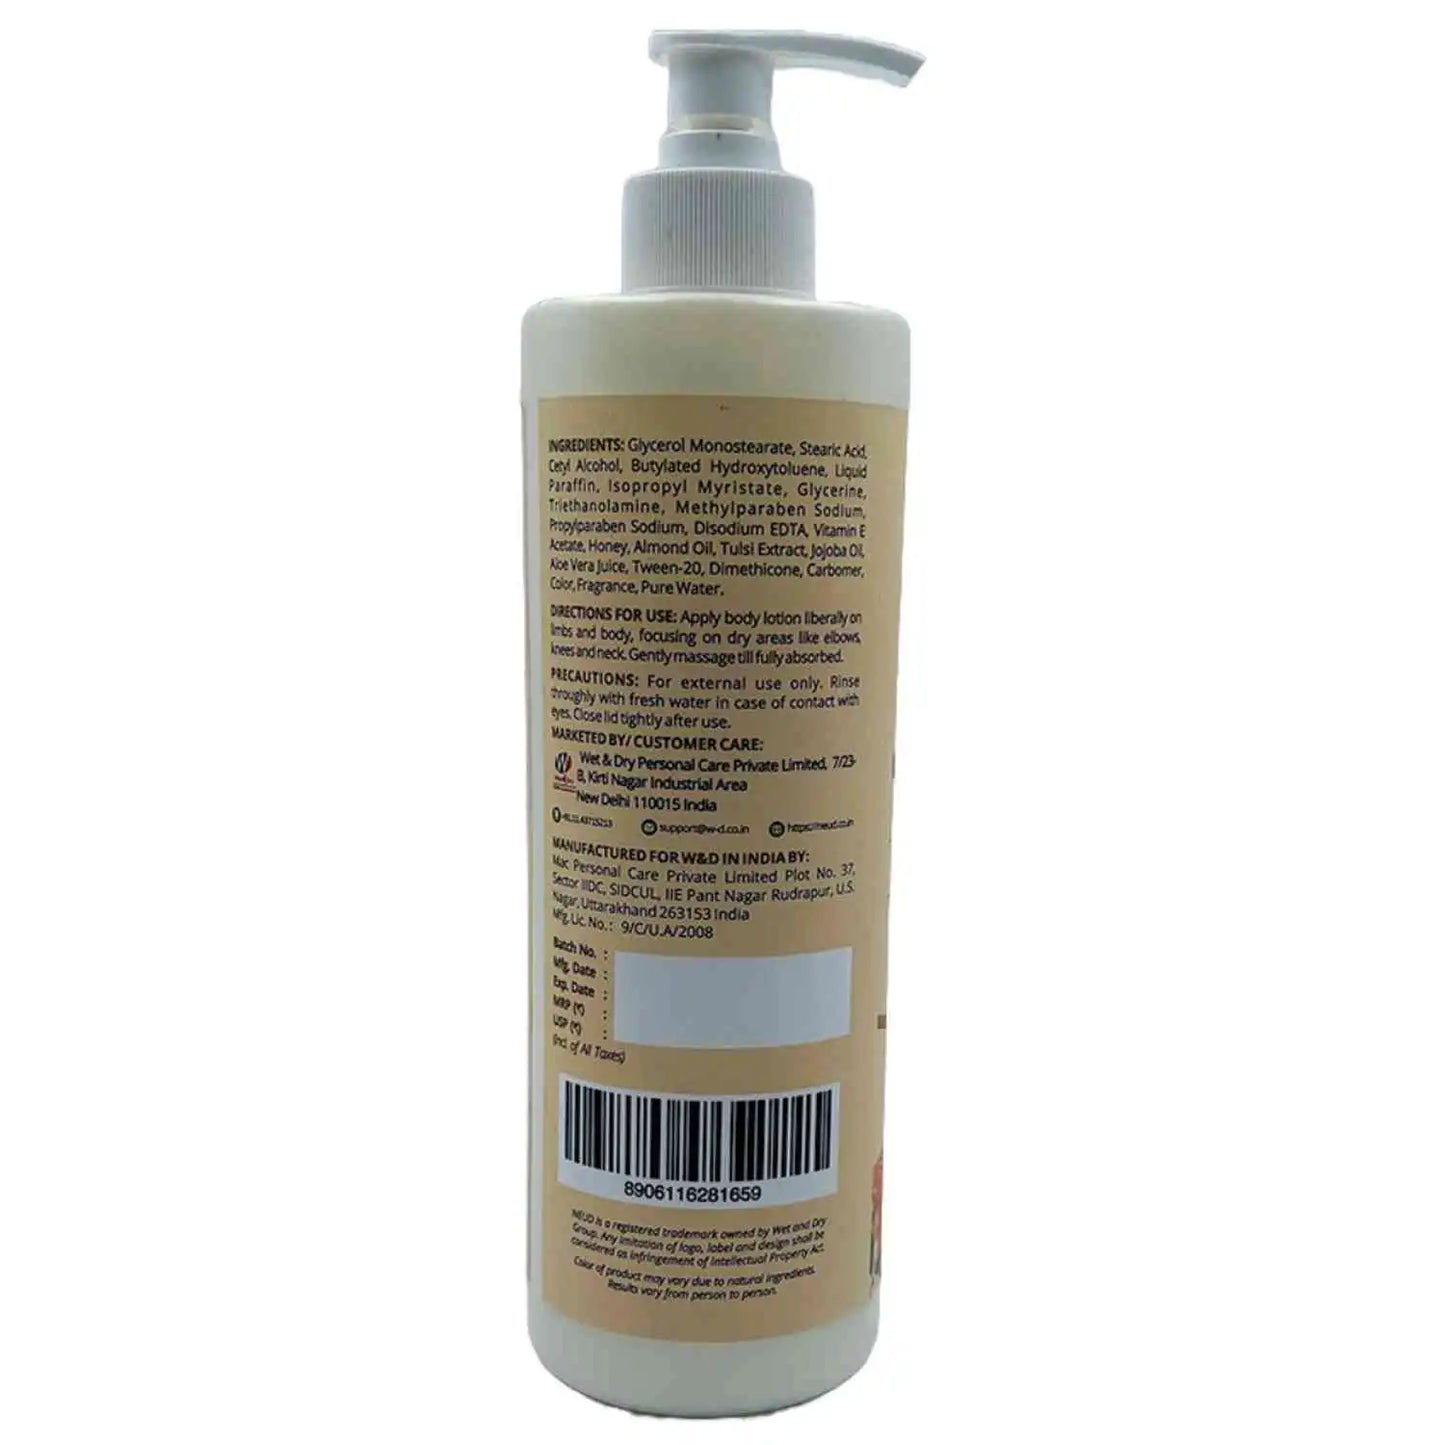 NEUD Body Lotion with Natural Extracts of Honey, Almond and Tulsi for Men and Women - 400ml